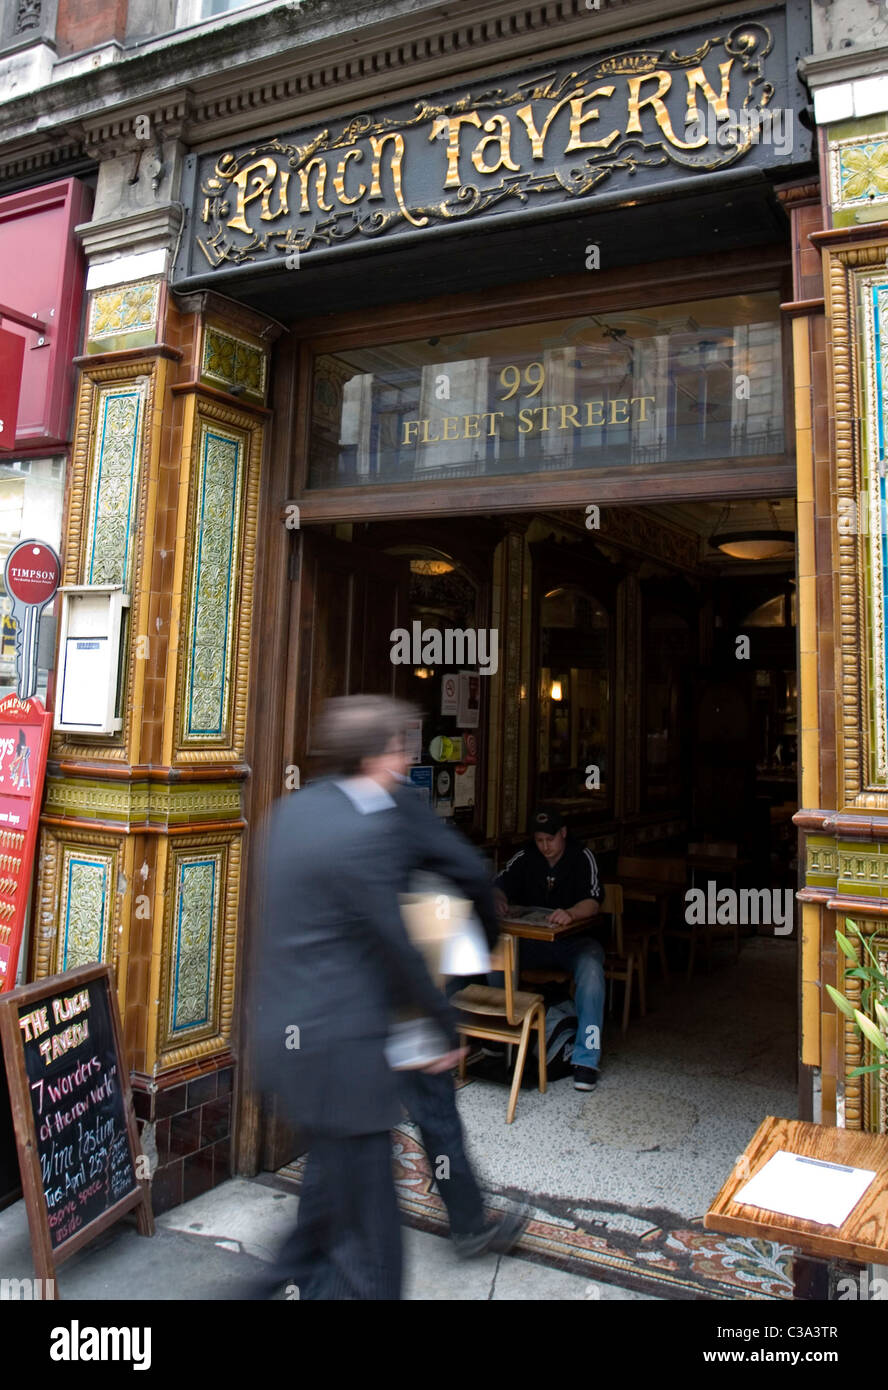 The punch tavern fleet street london which is hi-res stock photography ...